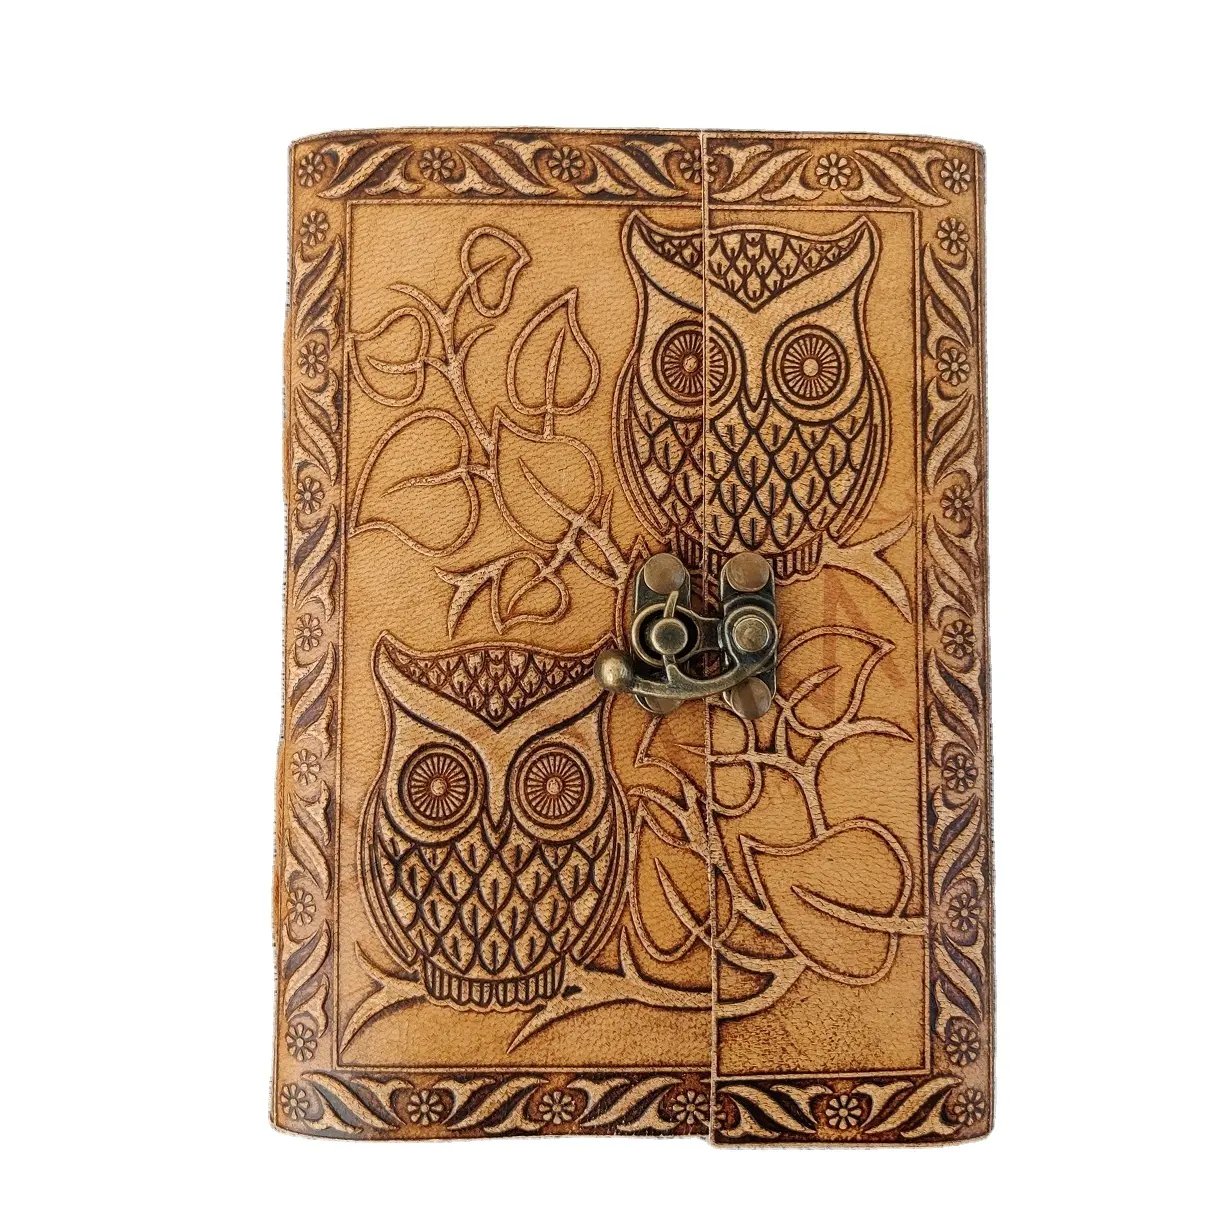 Beautifully Leather Embossed Owl Journal - Antique C- Lock with Wood free Handmade Cotton Paper Diary Note Book Hardcover